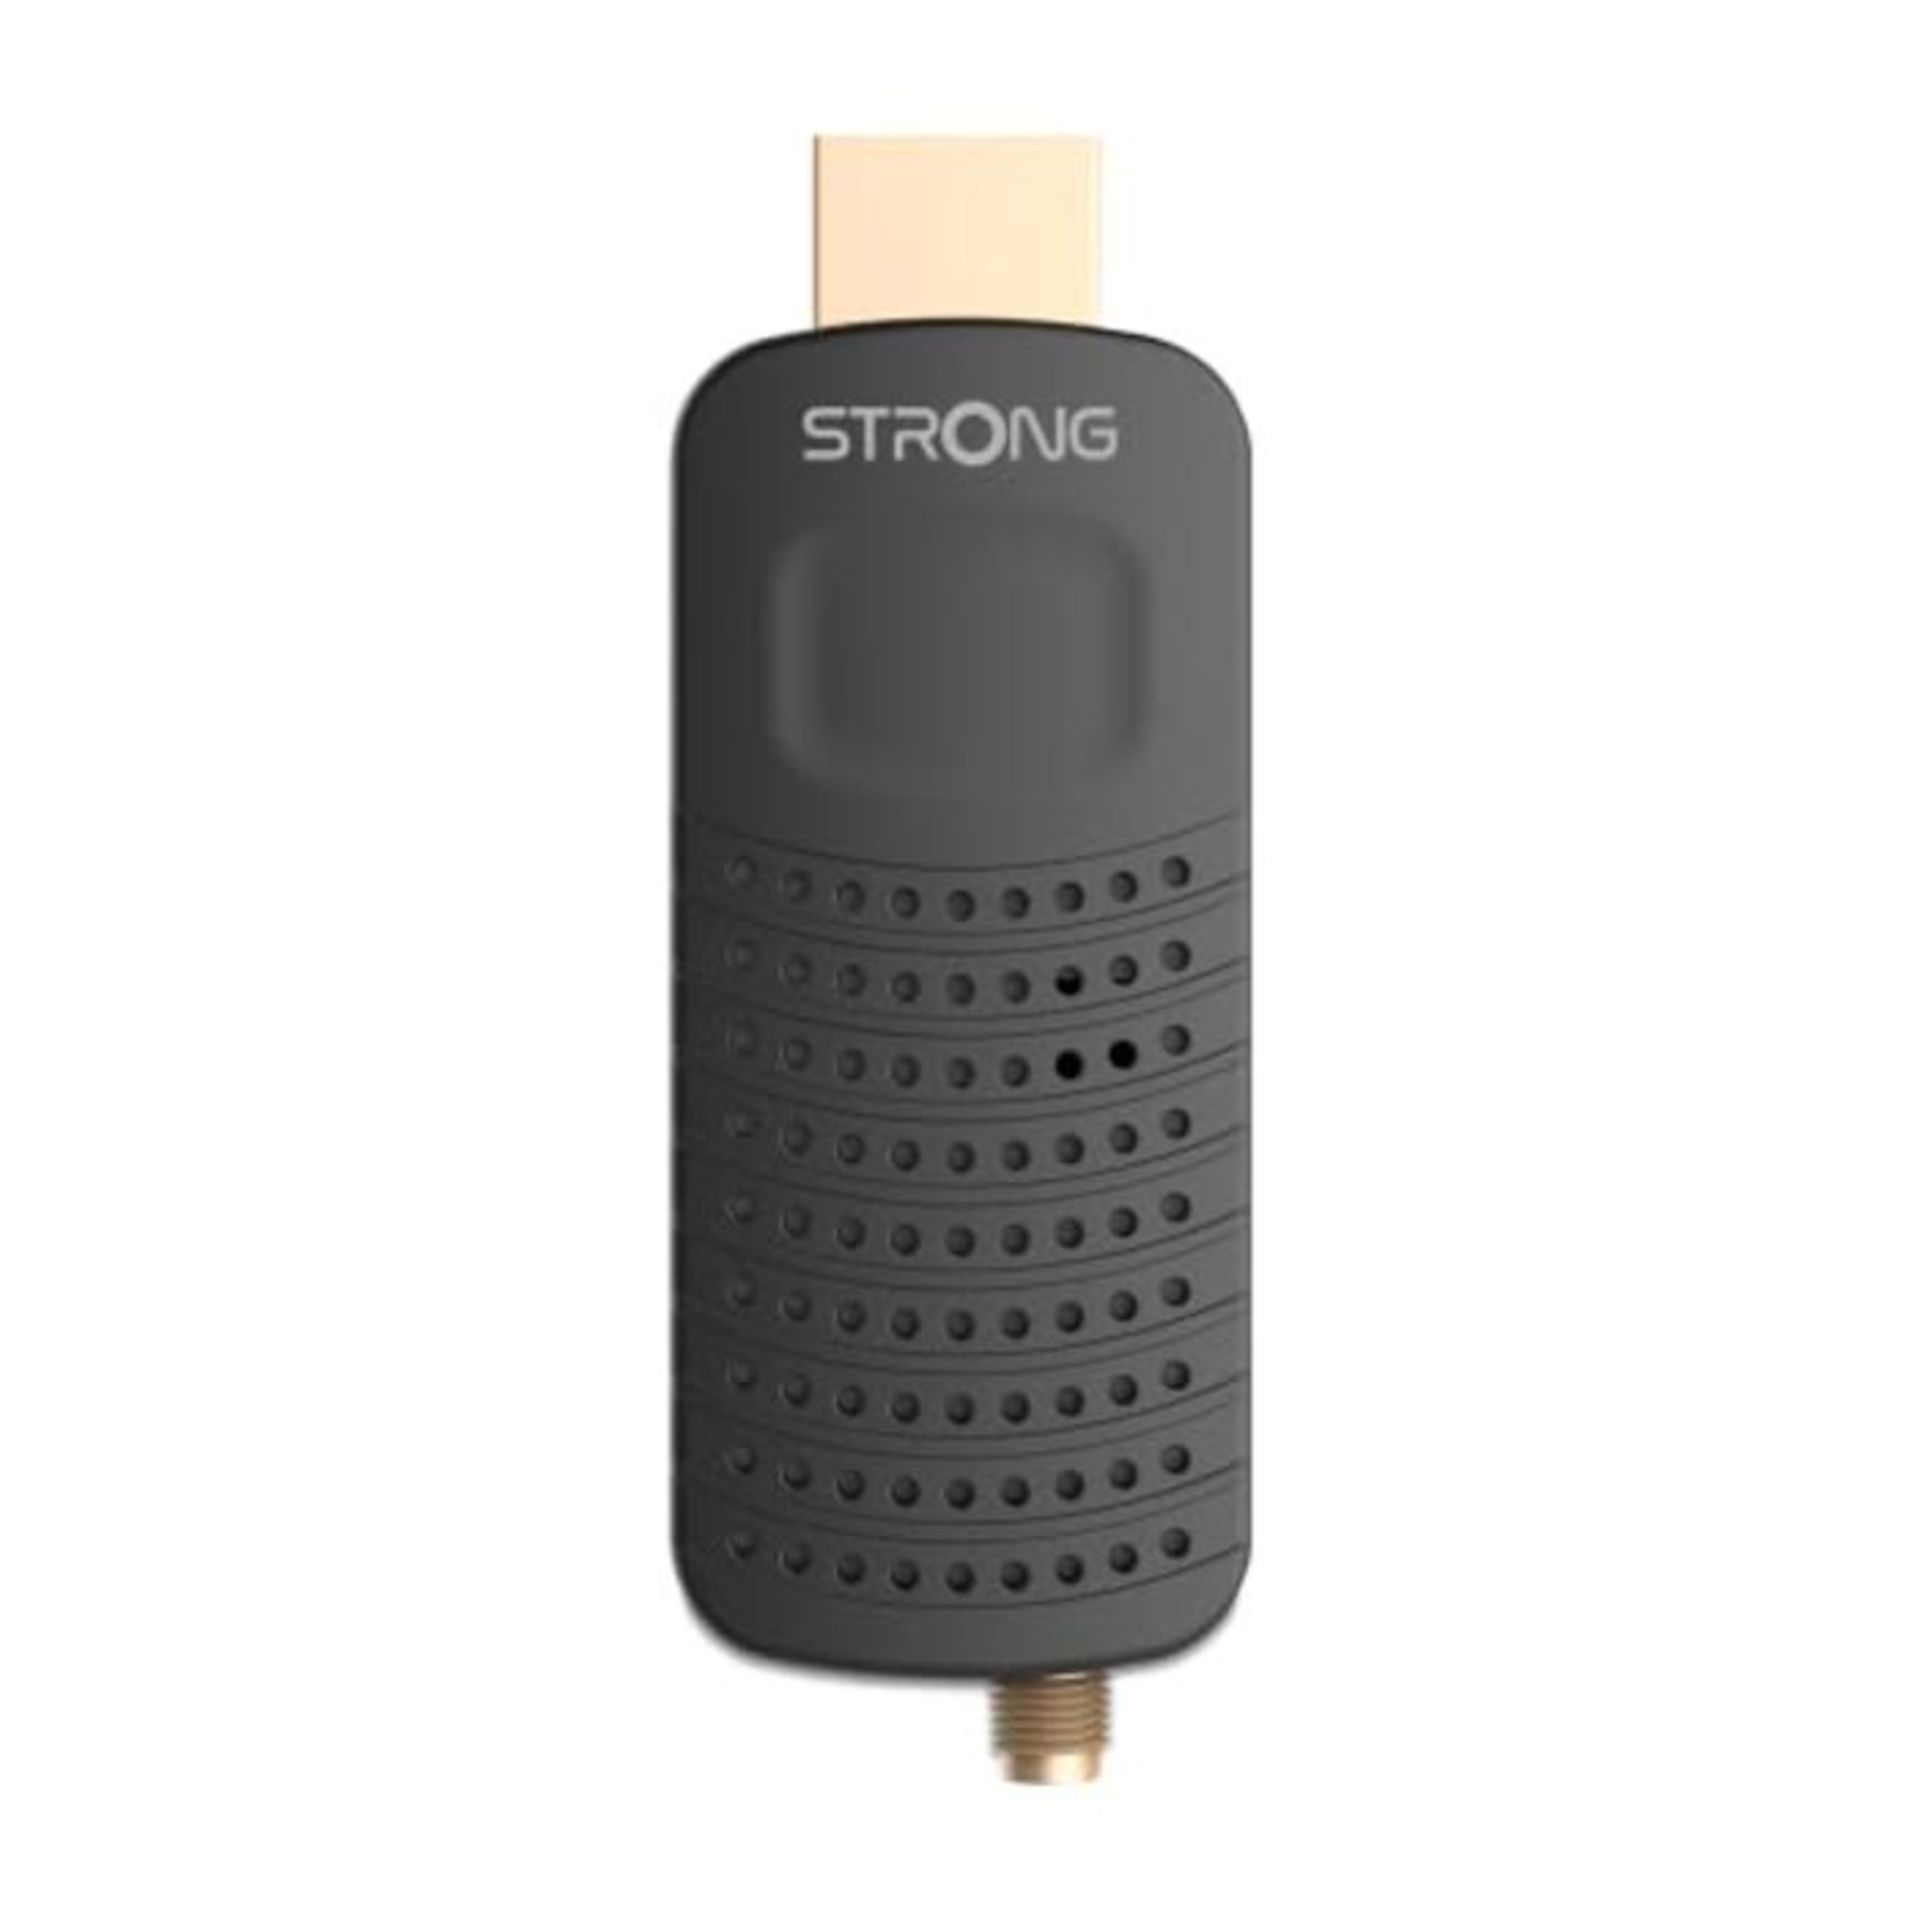 Strong SRT82 Full HD DVB-T2 HDMI Stick - Compatible with Hevc265 - TV Receiver/Tuner w